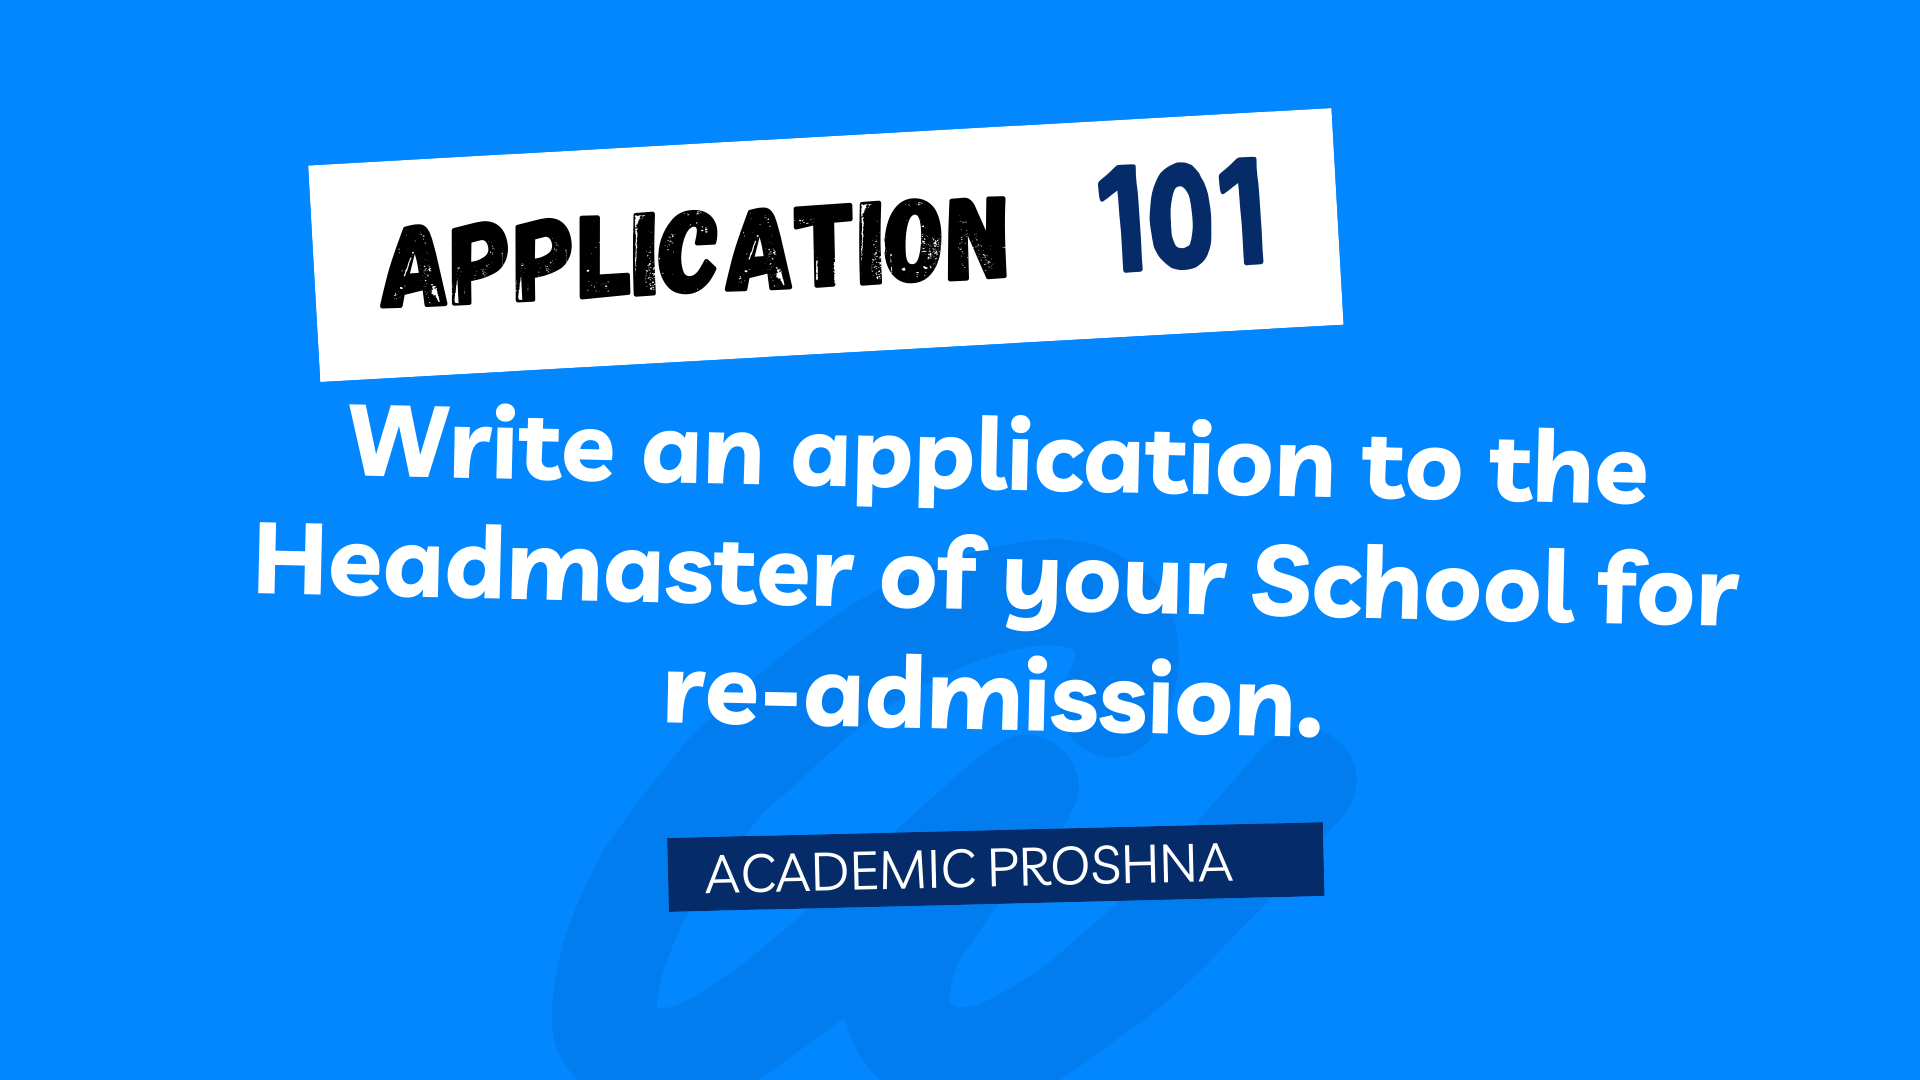 Write an application to the Headmaster of your School for re-admission.